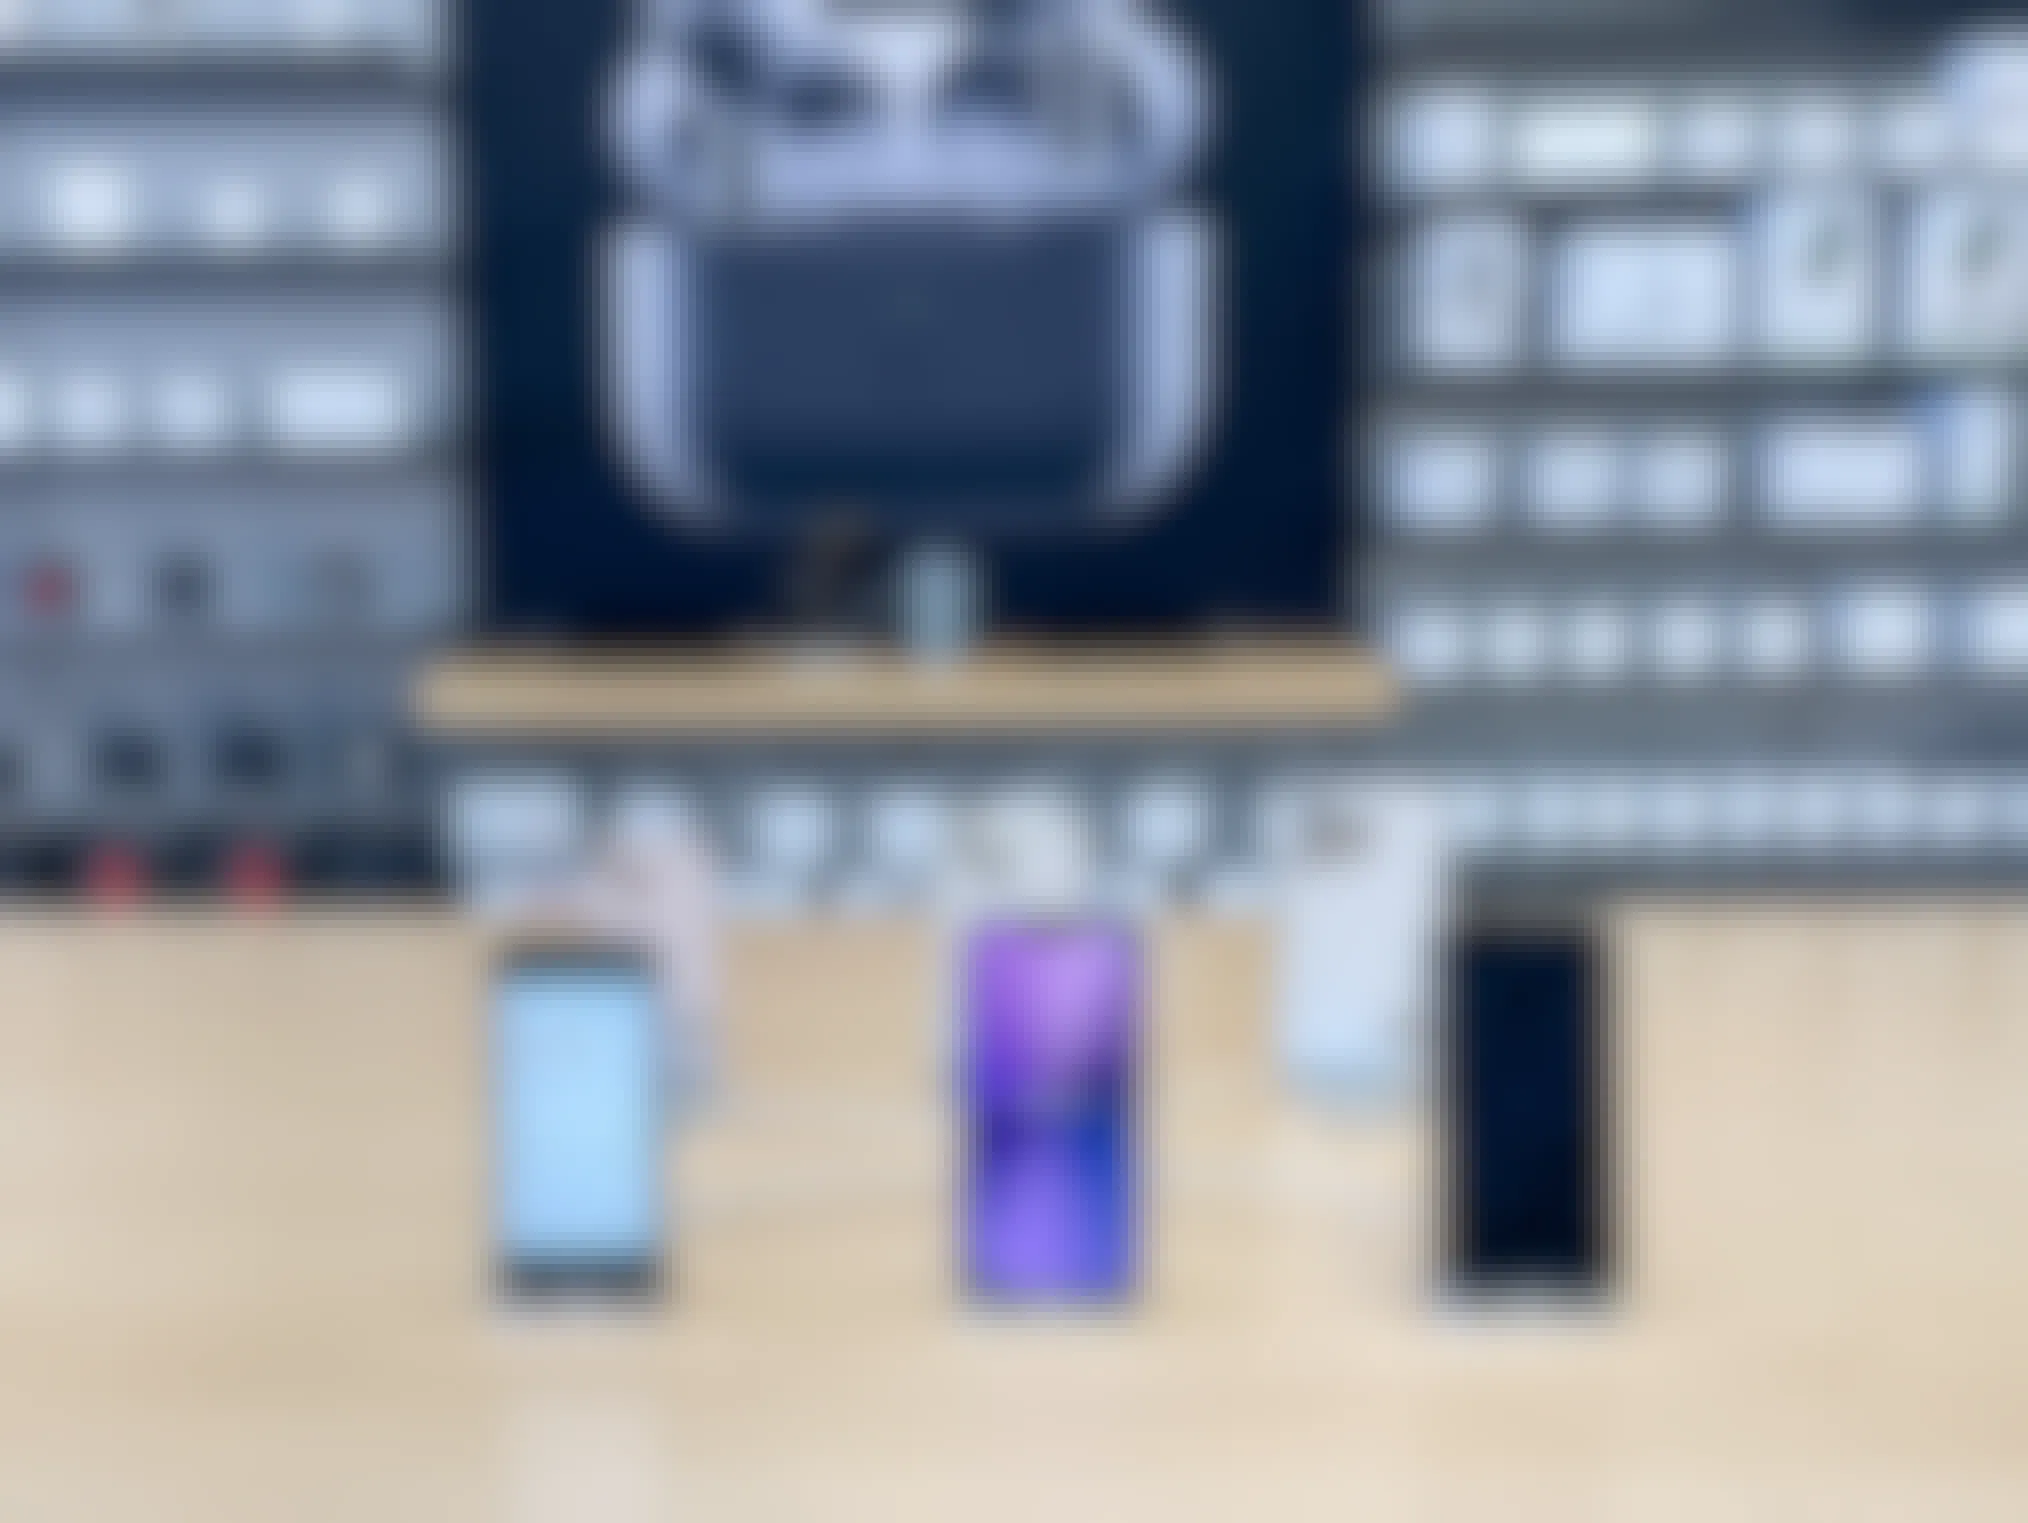 A variety of iPhones standing on a table with other apple products in the background.